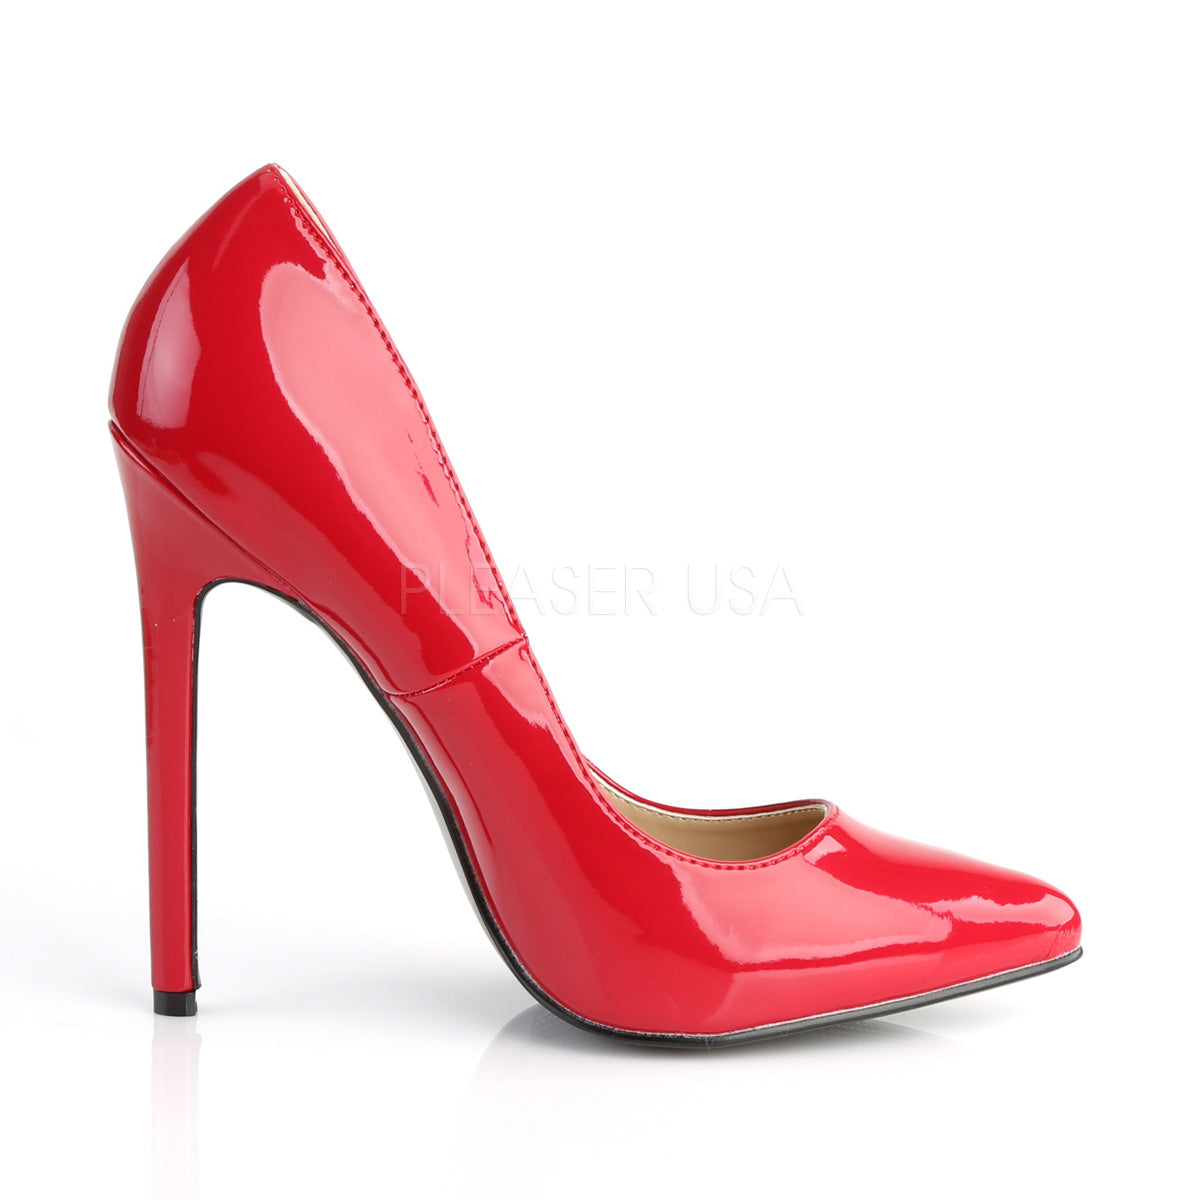 Stylish red women's shoes on Craiyon